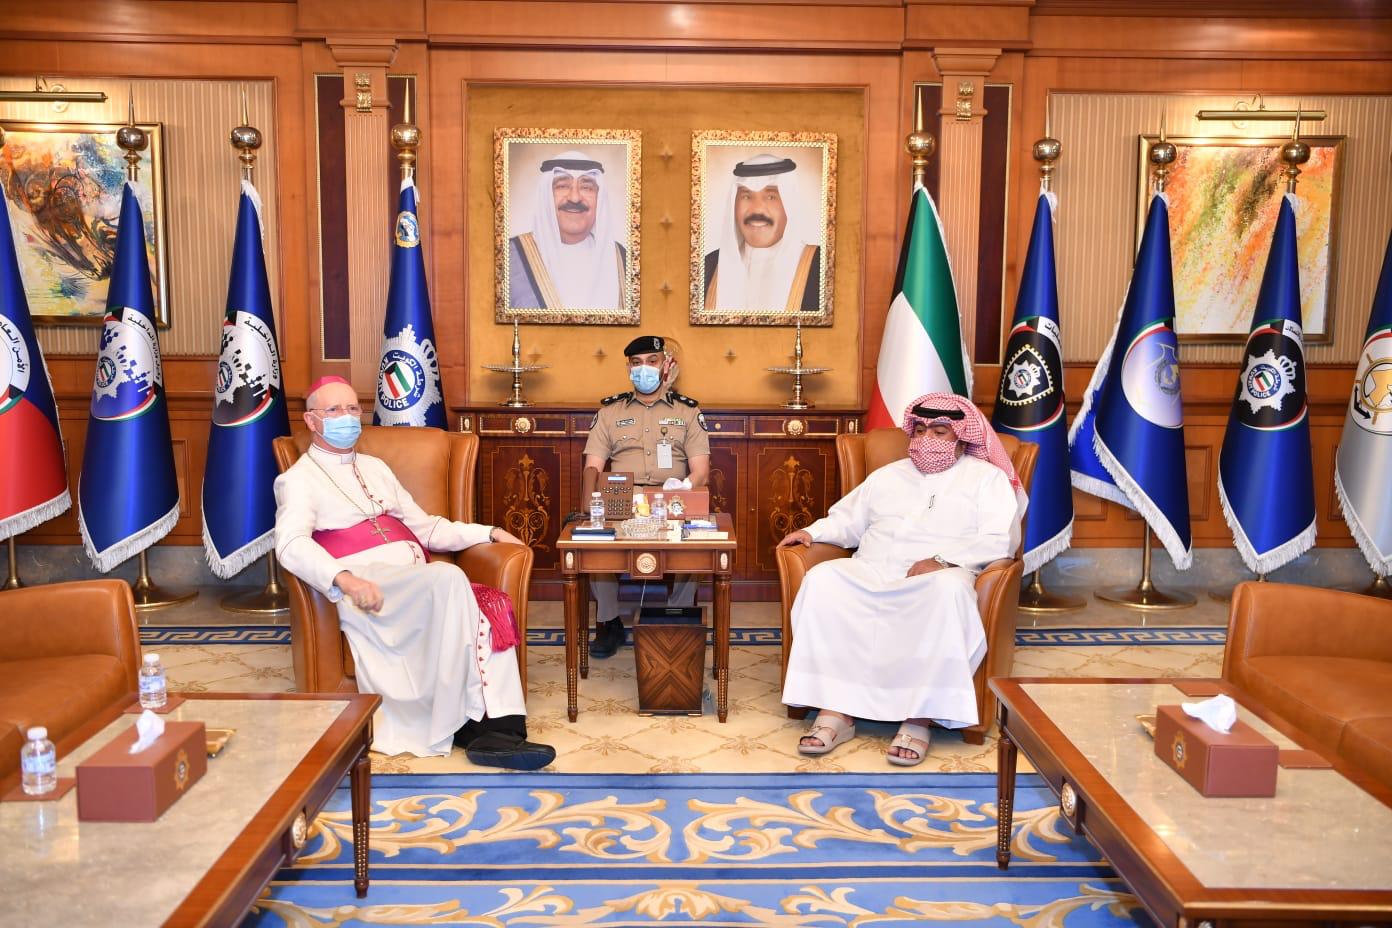 Minister of Interior held talks with the Vatican Ambassador to Kuwait